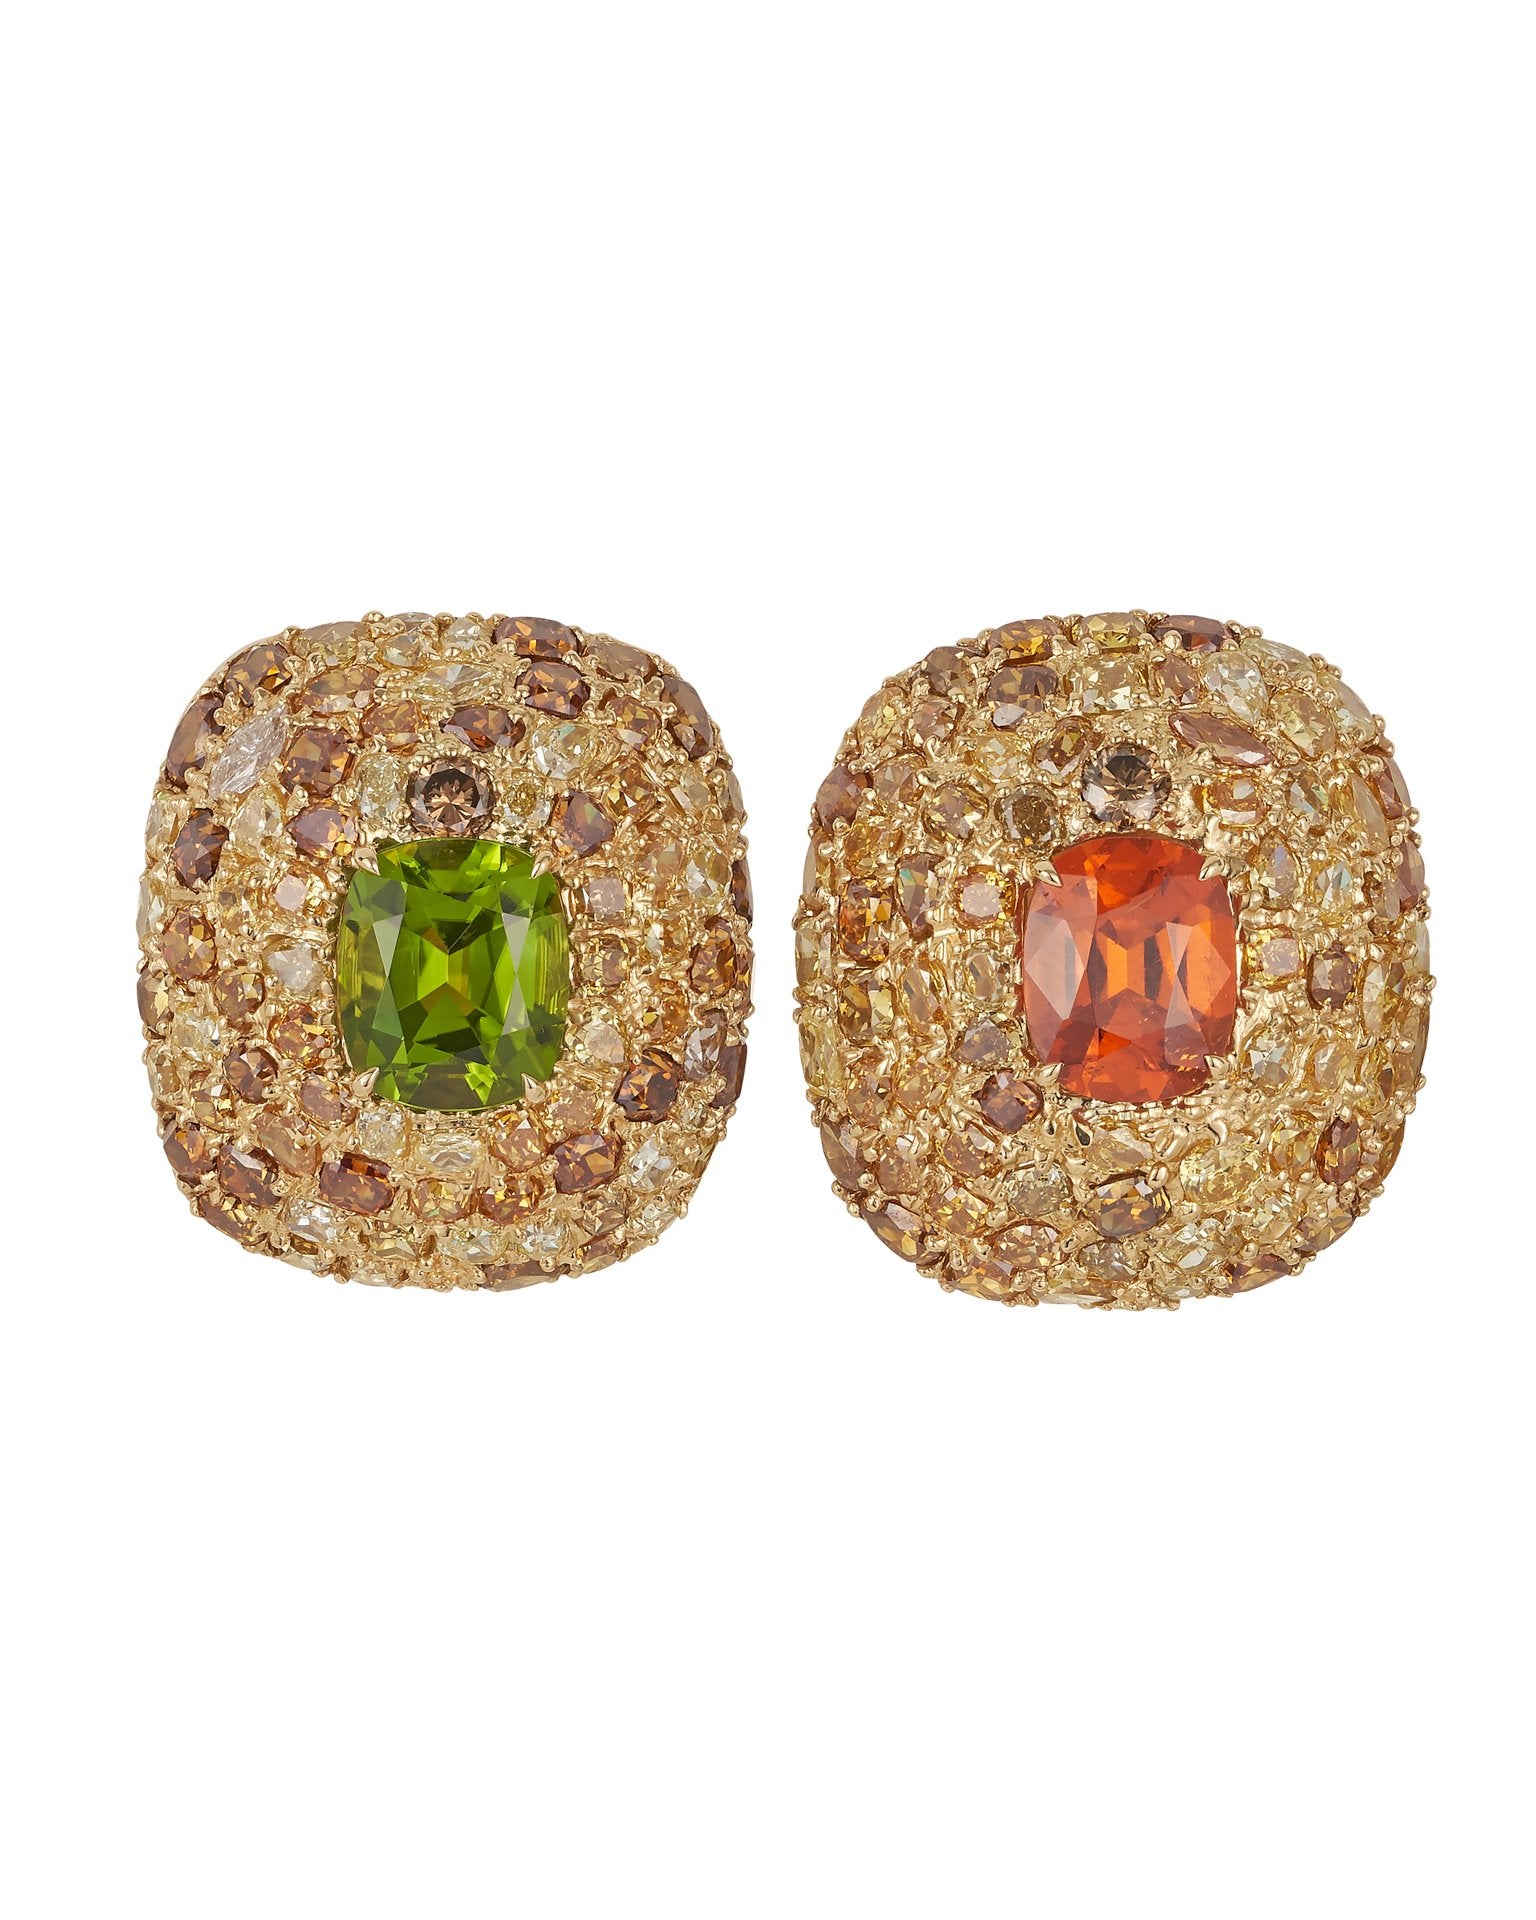 Mandarin garnet and peridot earrings, surrounded by cognac diamonds, crafted in 18 karat yellow gold.